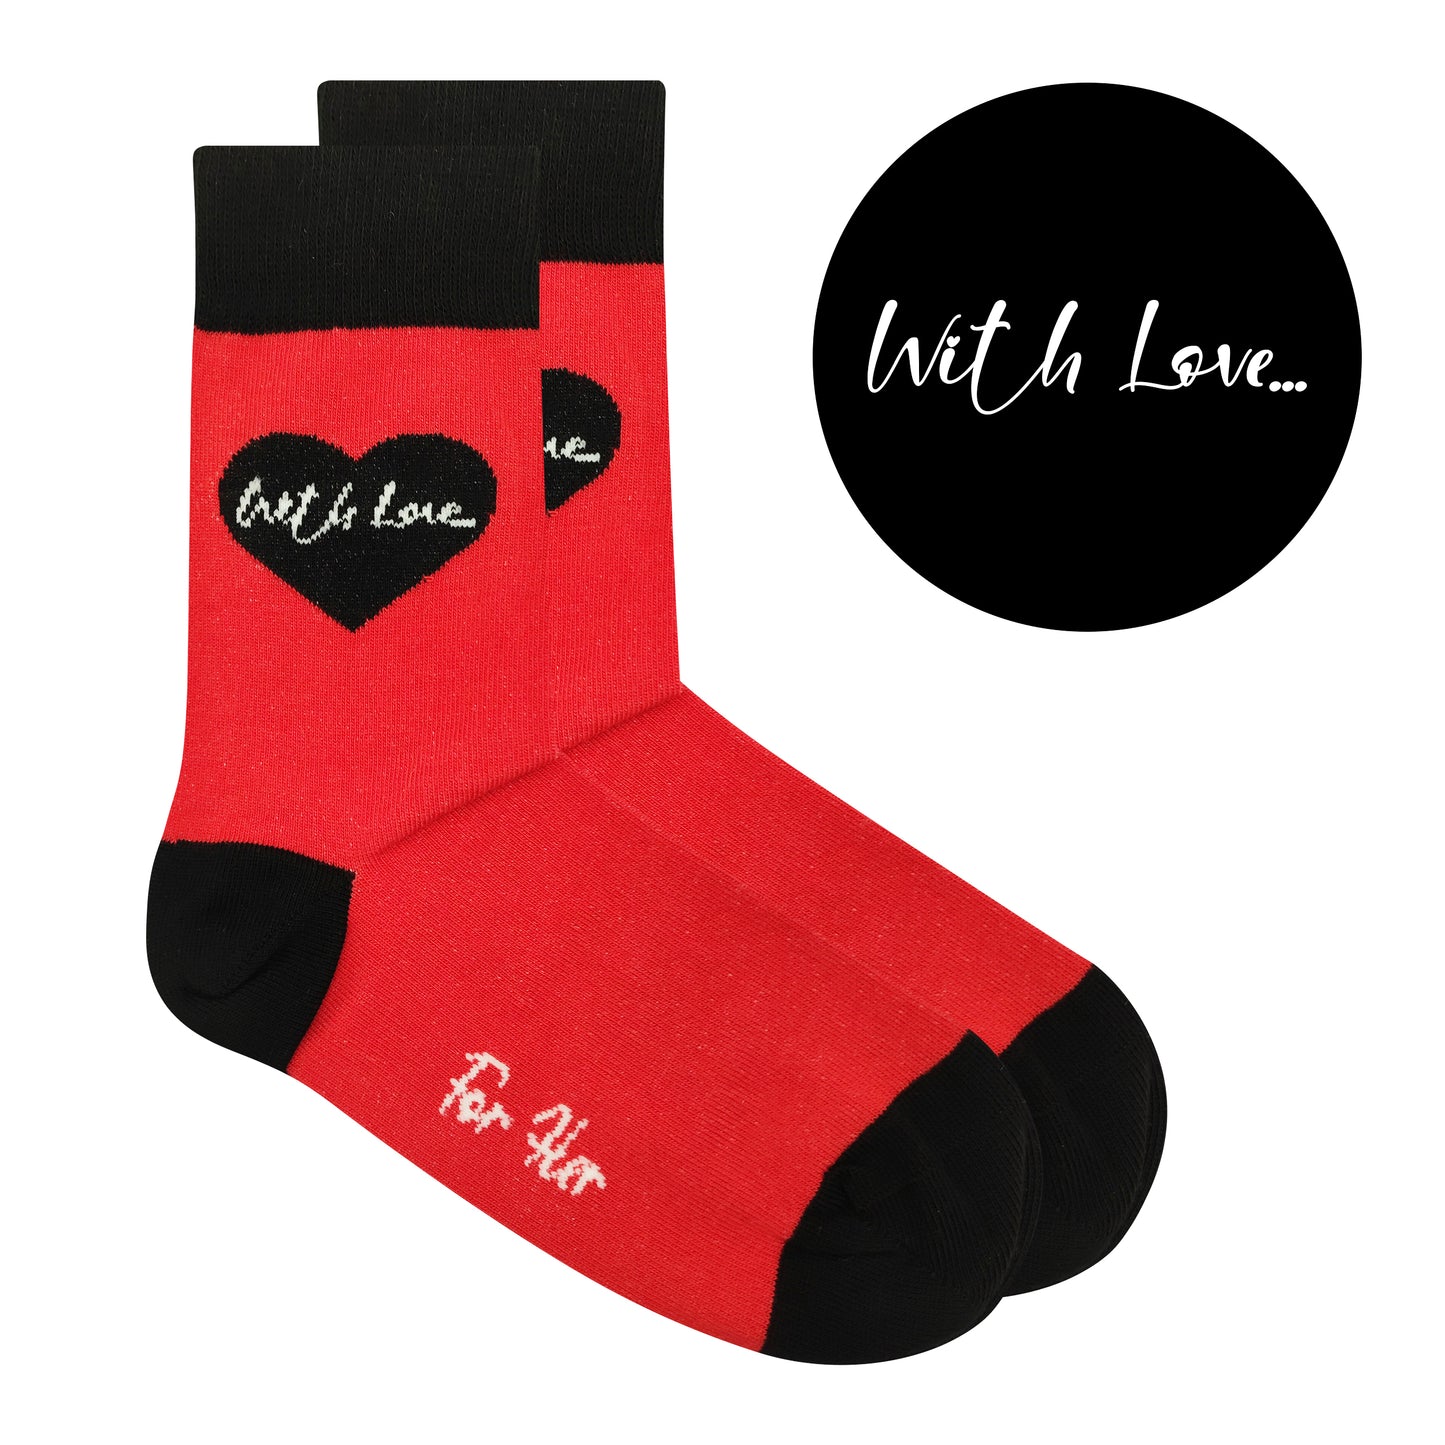 With Love Socks Gift Box - For Him & For Her (Mixed Sizes)